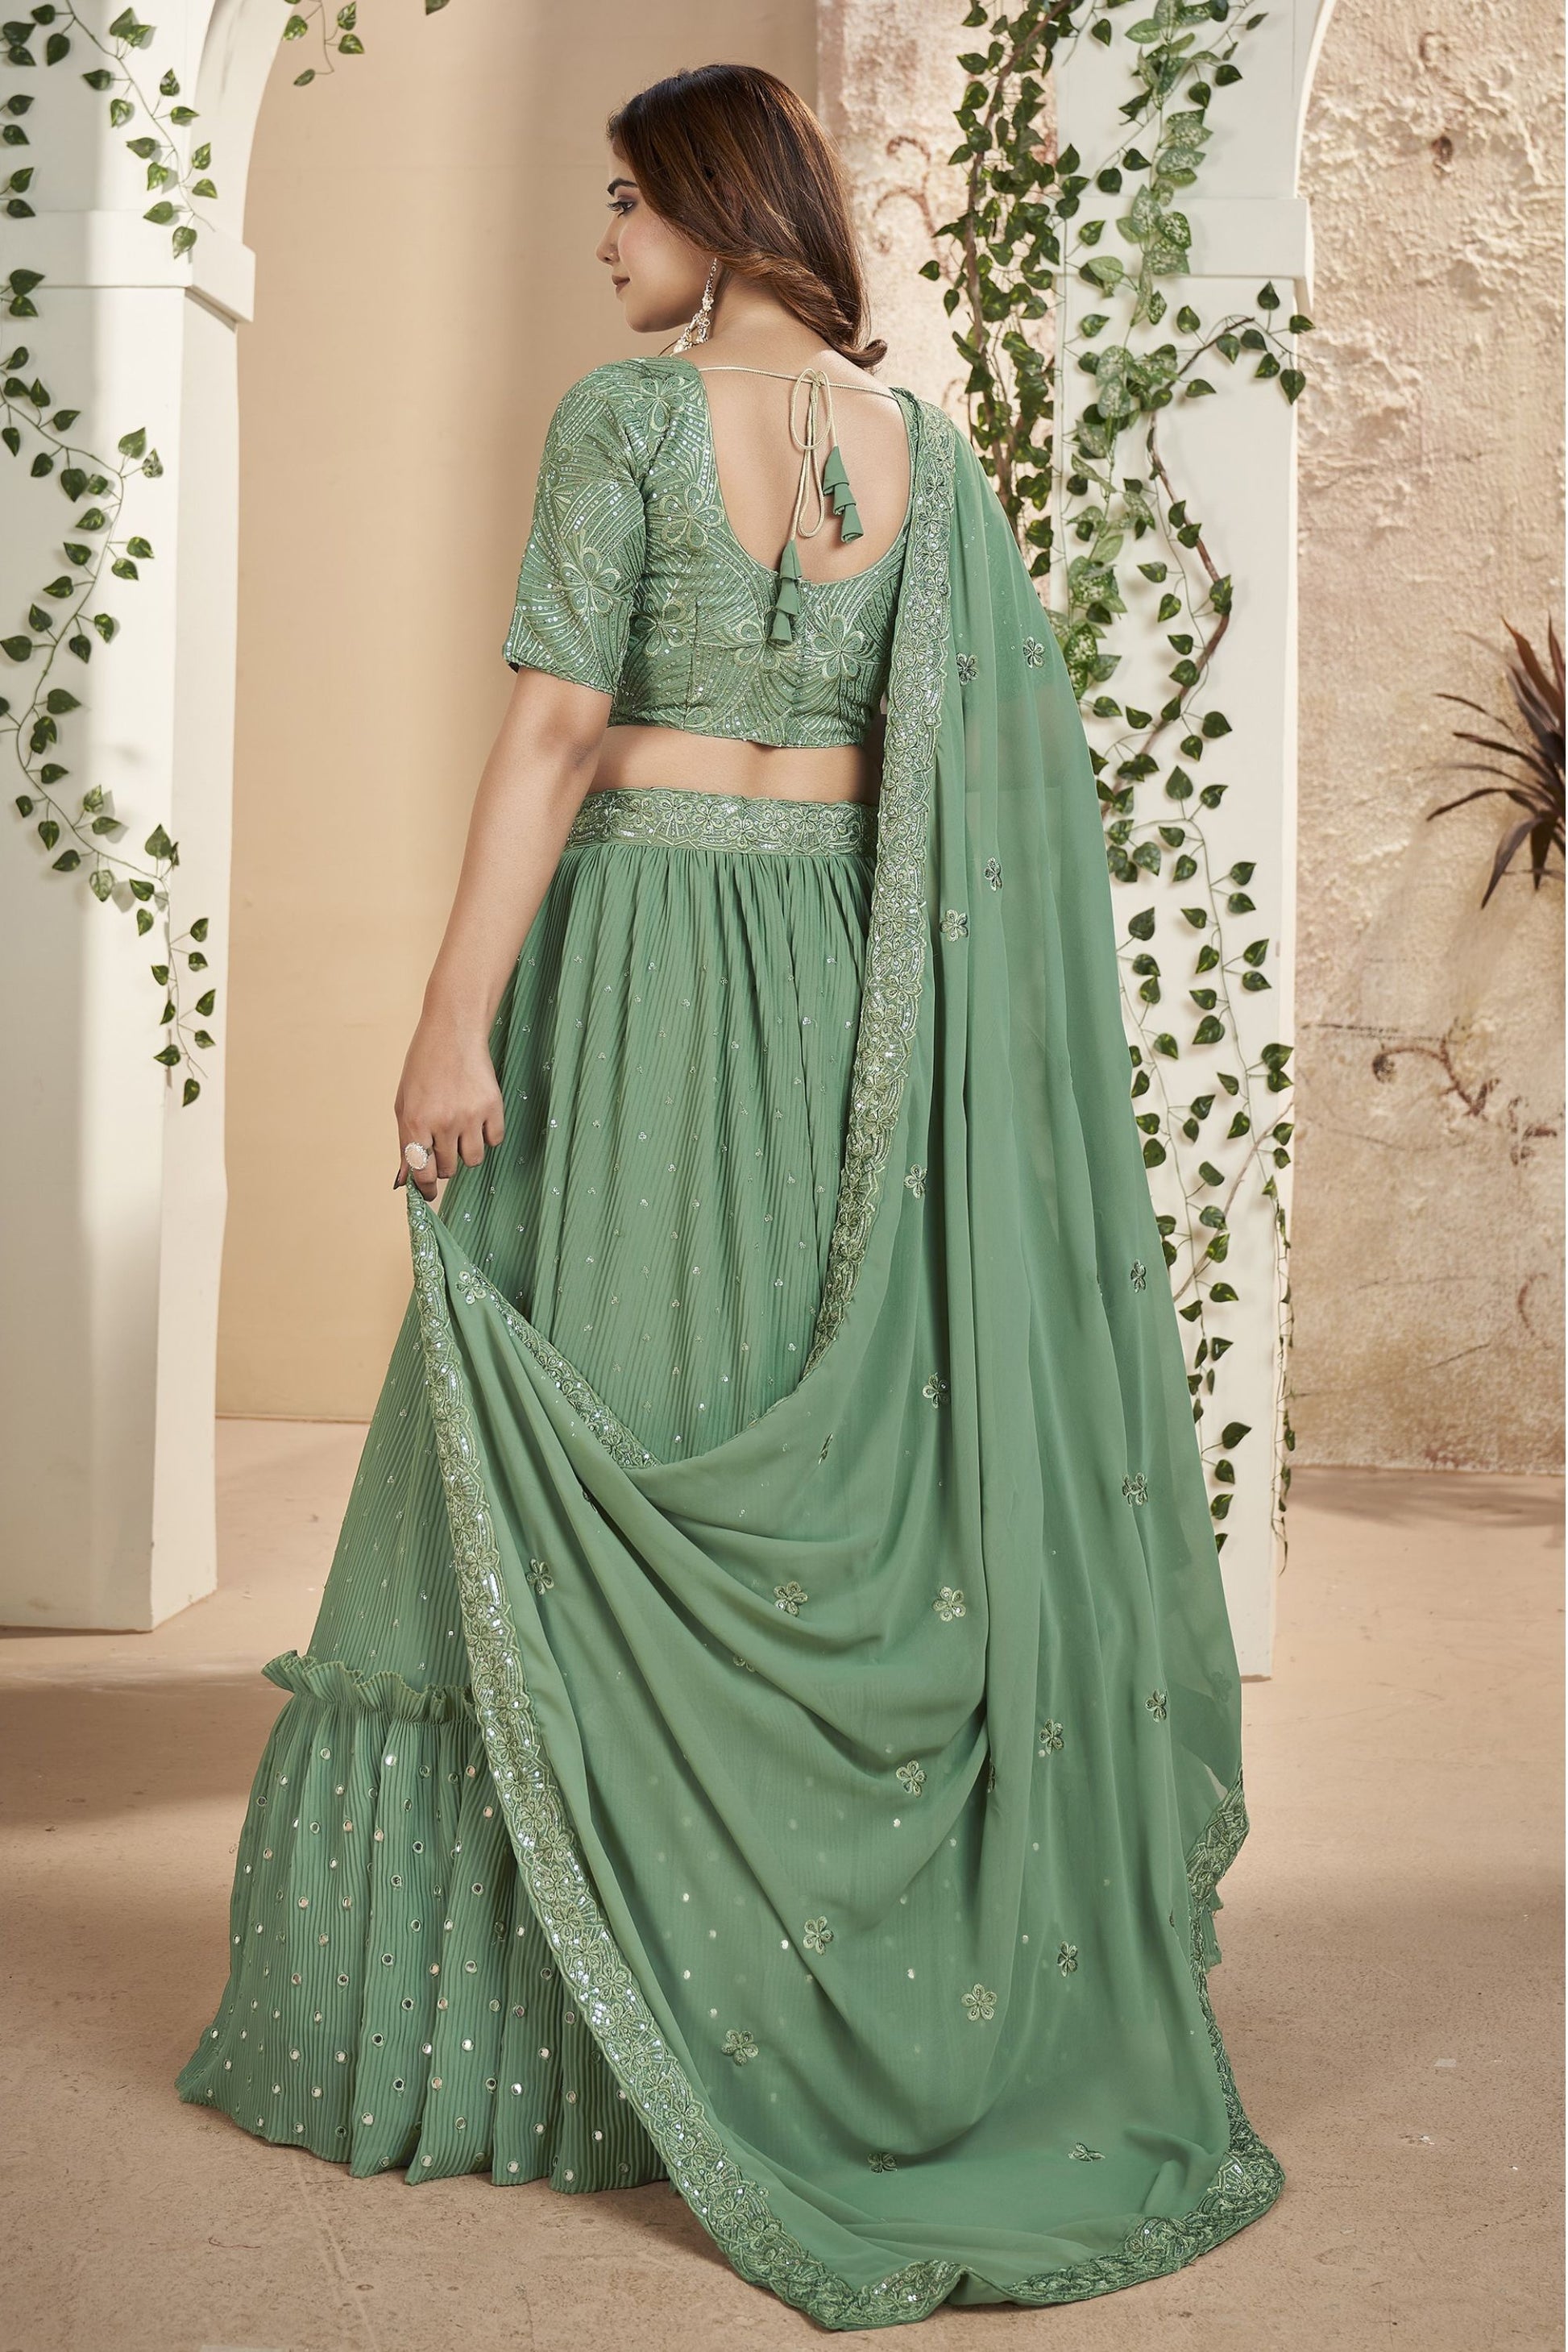 Green Georgette Ruffle Lehenga Choli 9 Meter Flair For Indian Festivals & Weddings - Sequence Embroidery Work, Thread Embroidery Work,